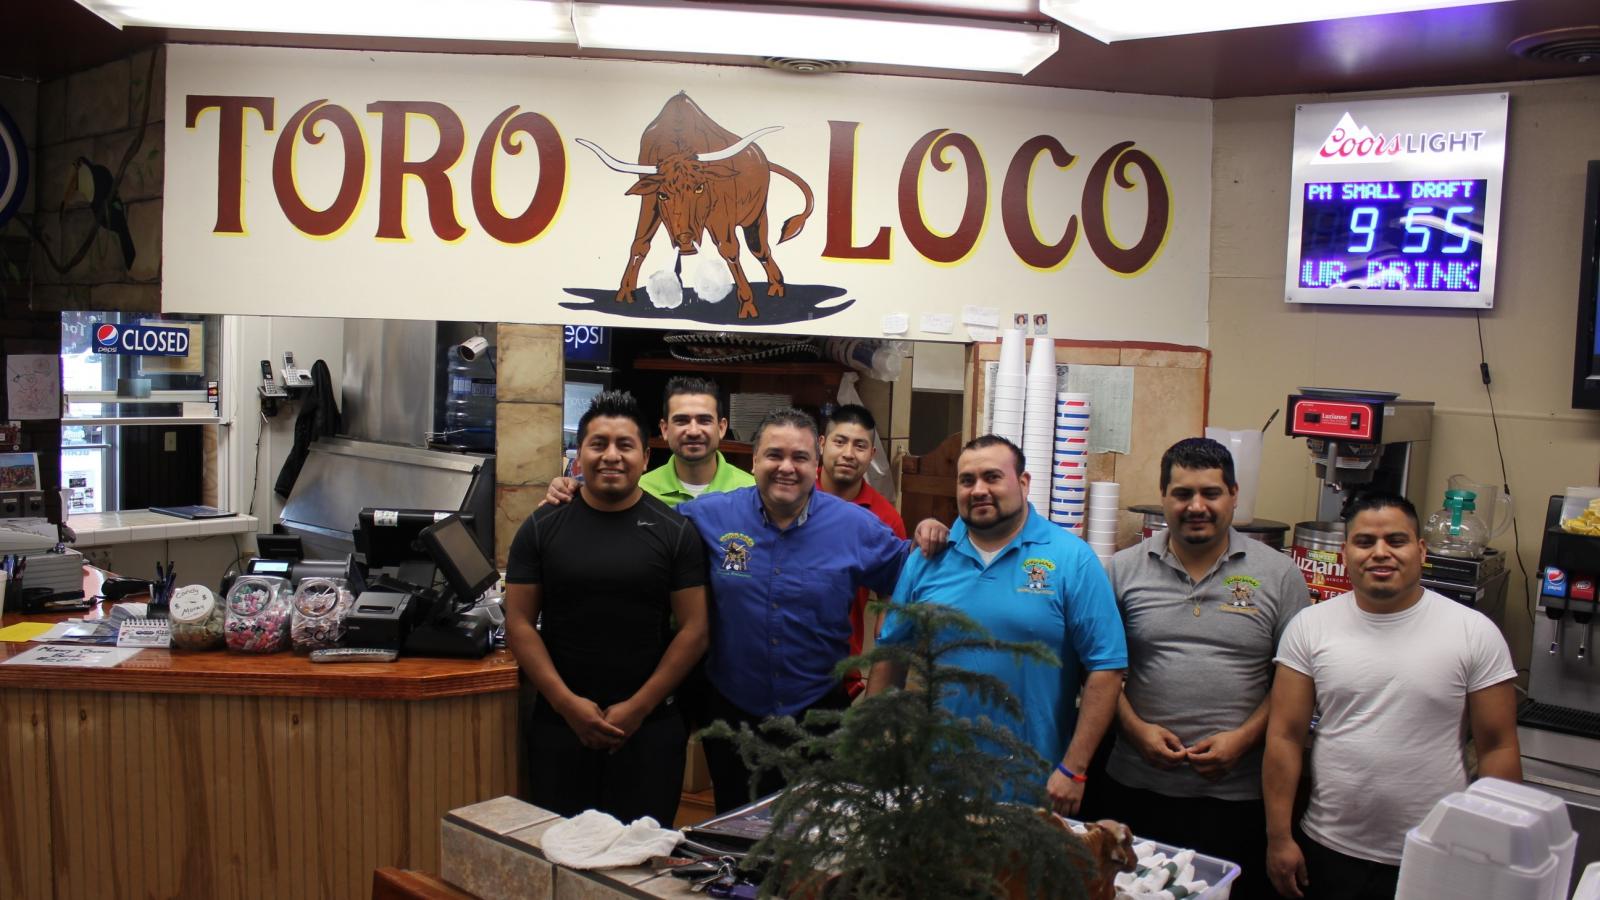 Mario and his employees at Toro Loco